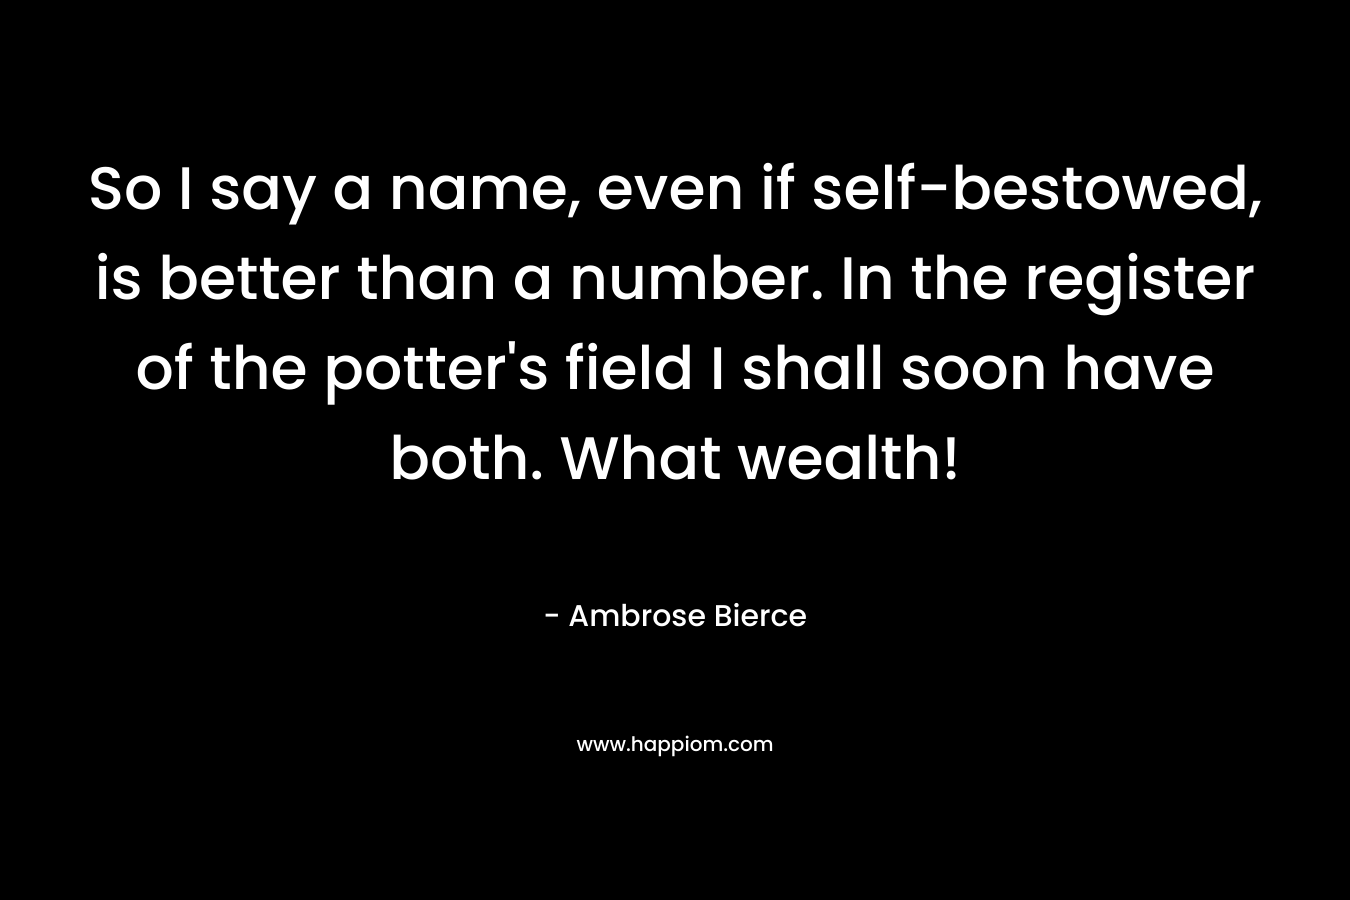 So I say a name, even if self-bestowed, is better than a number. In the register of the potter’s field I shall soon have both. What wealth! – Ambrose Bierce